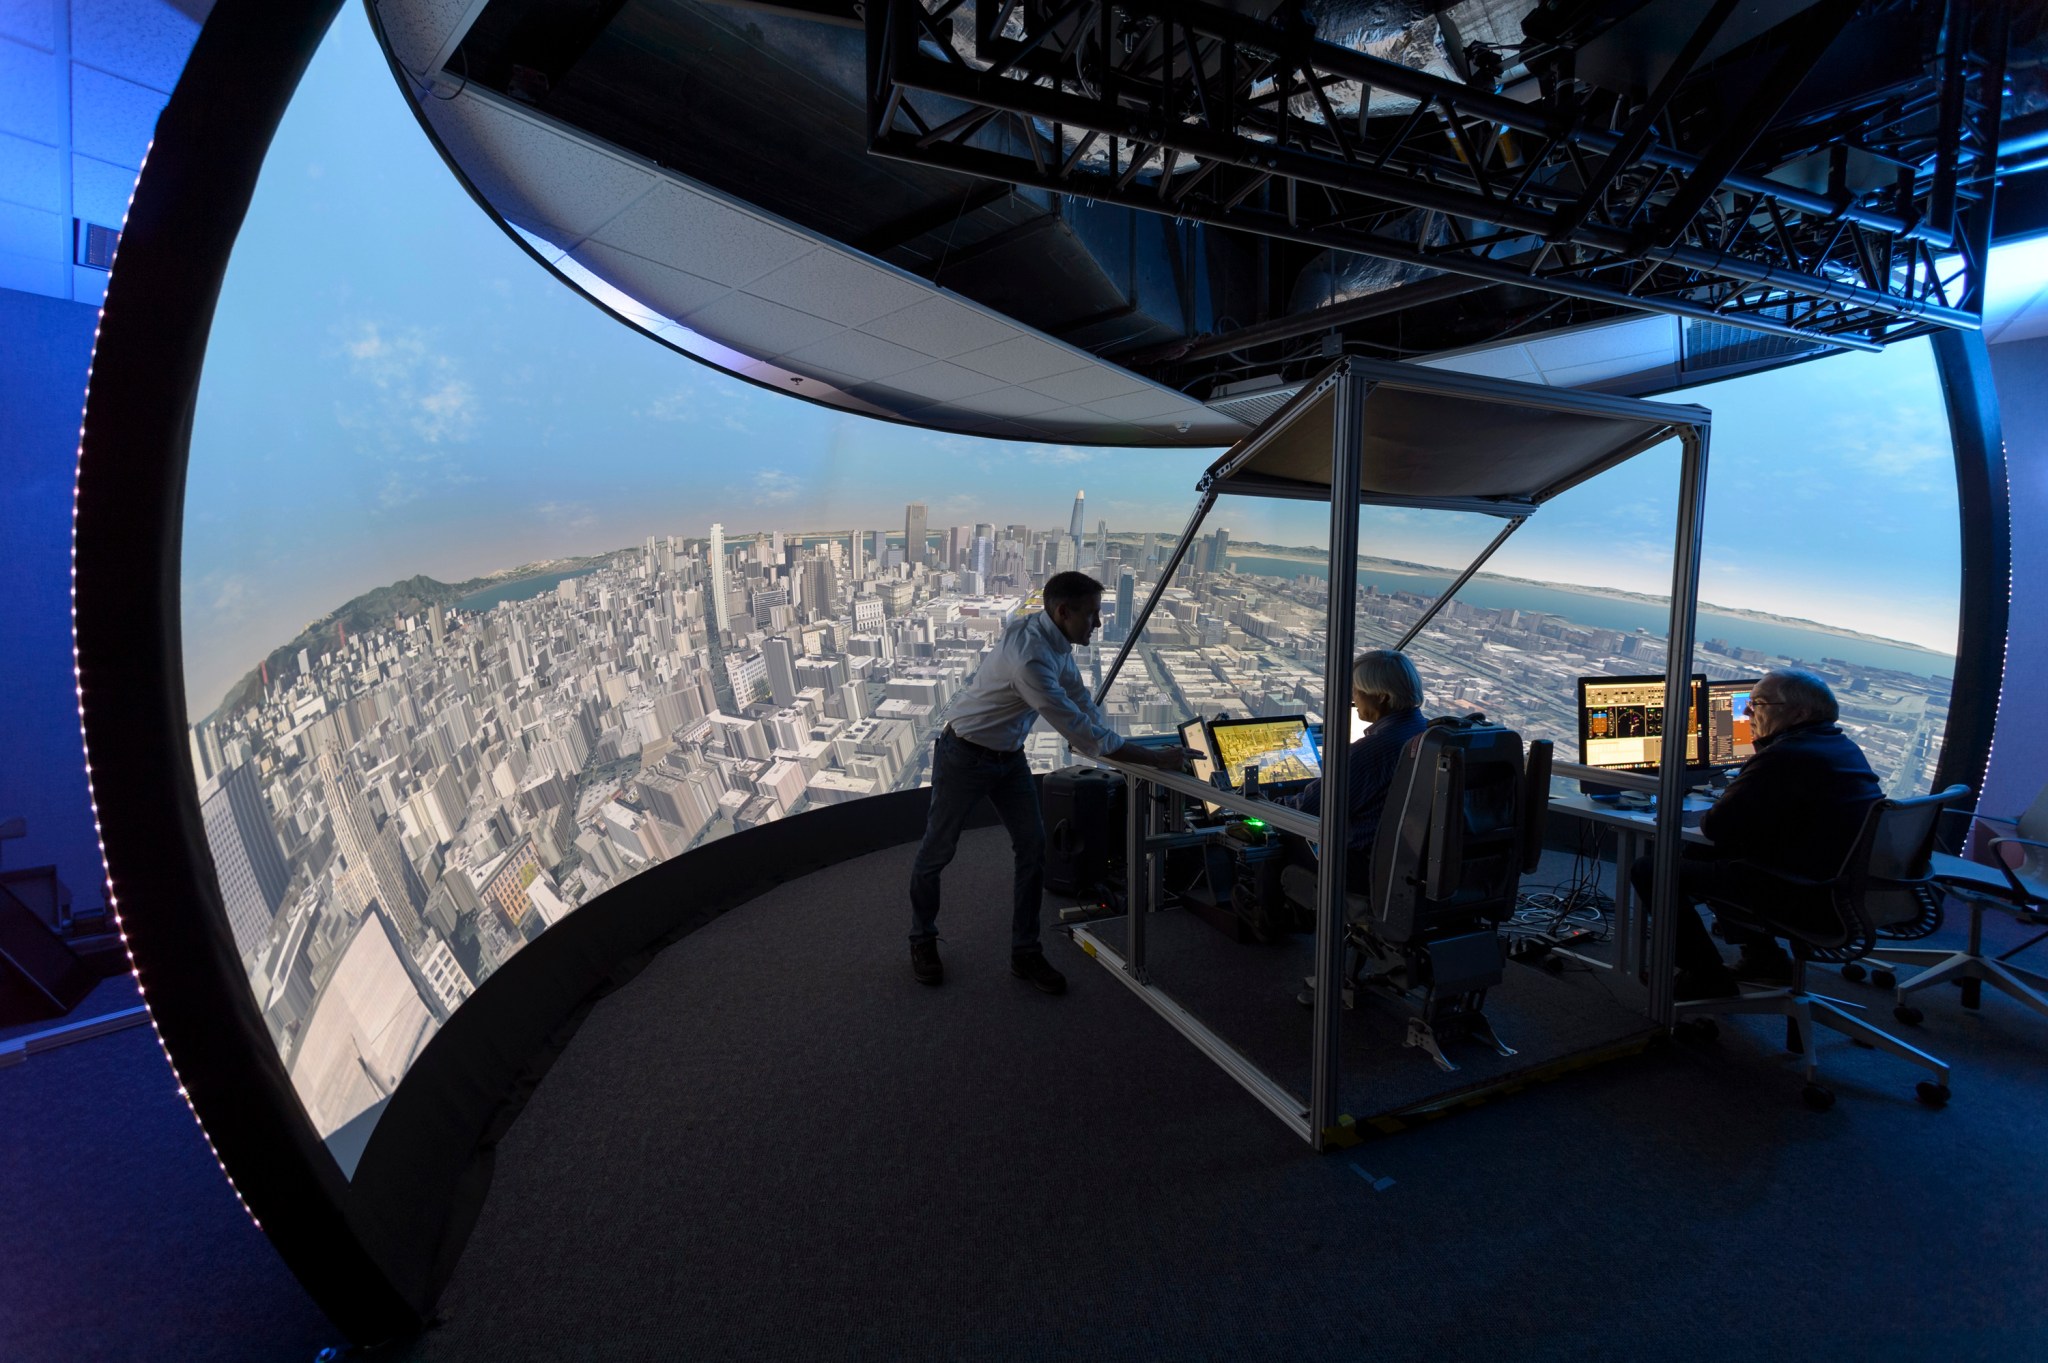 Inside a NASA simulation lab with a large screen simulation screen showing San Francisco city views and three workers in the center.